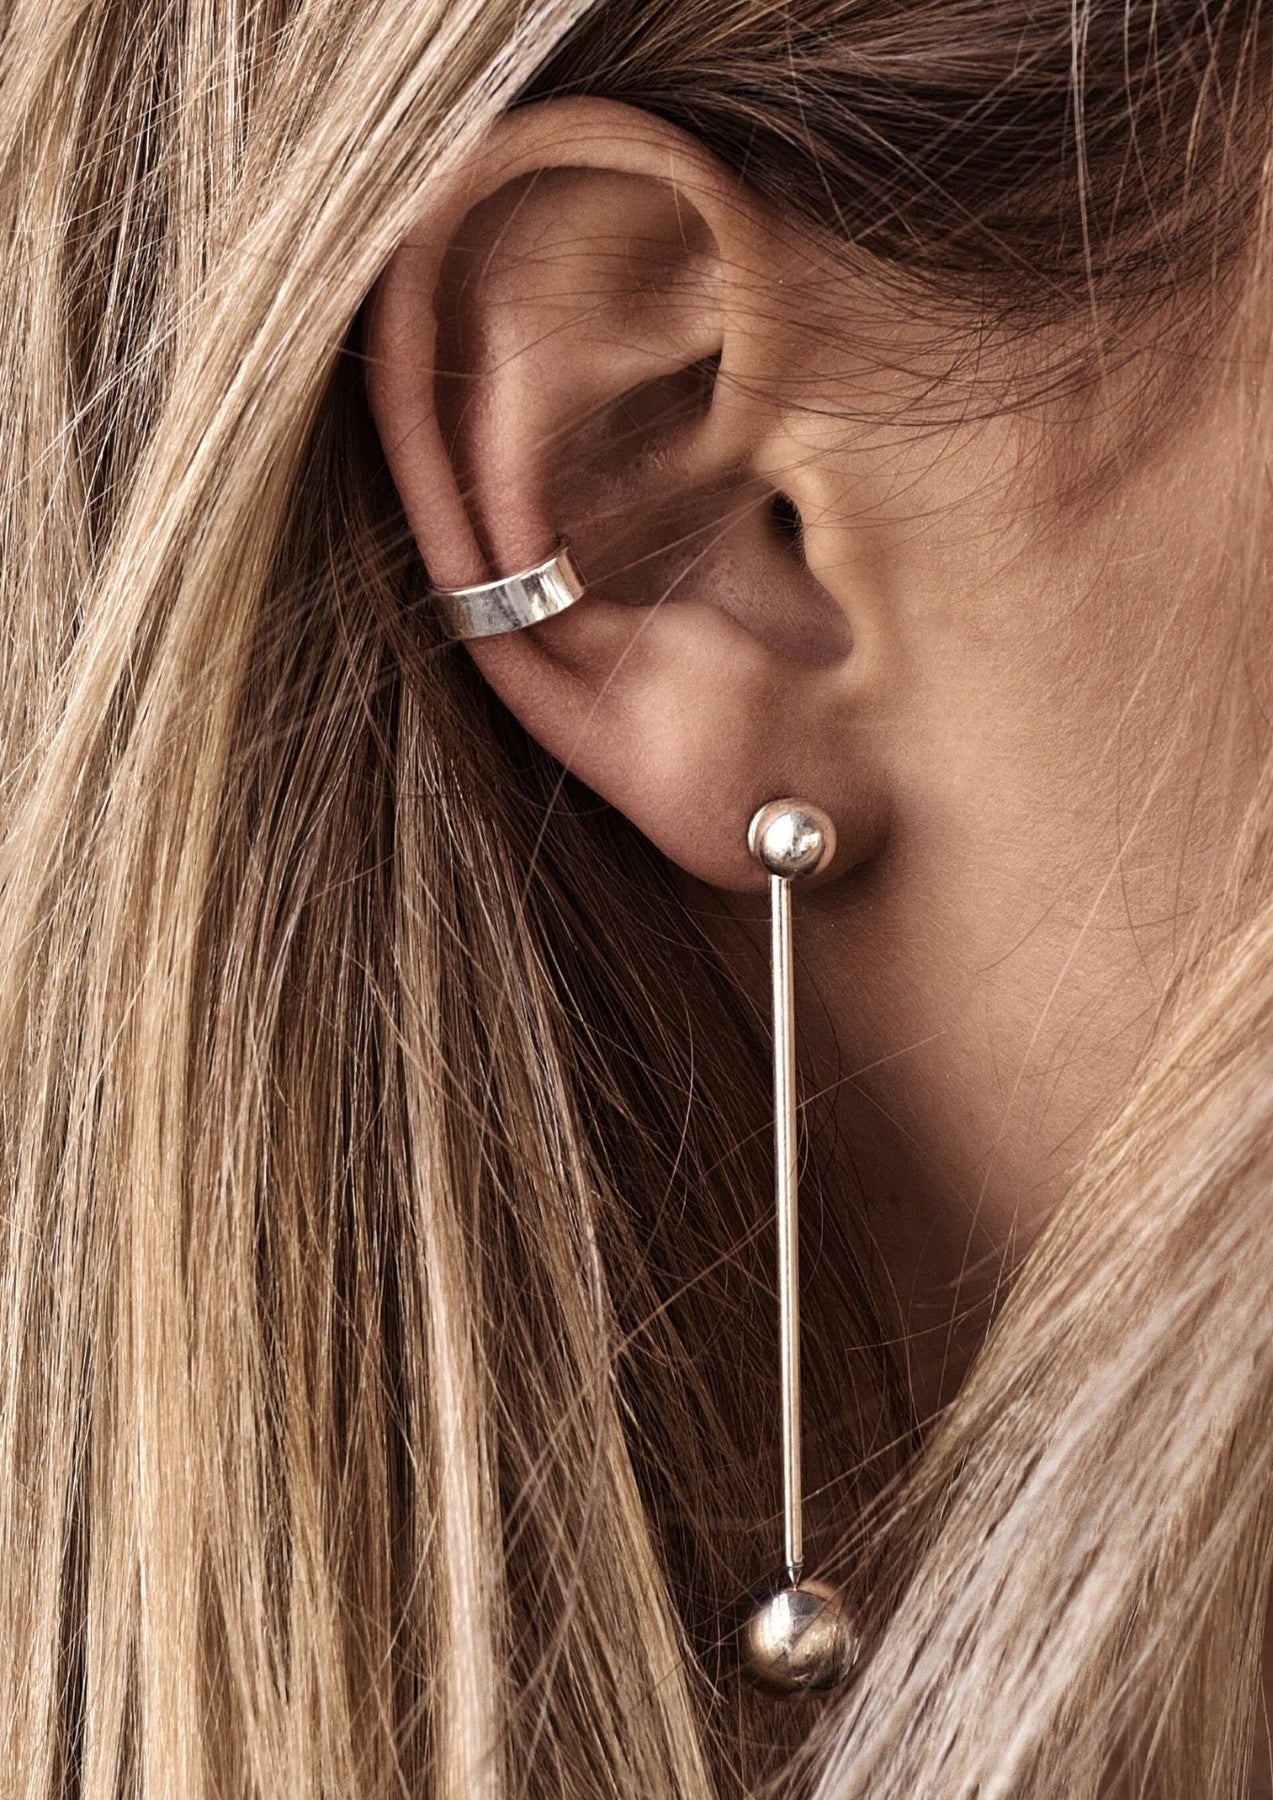 A close-up of a woman's ear featuring the Flat Ear Cuff in Sterling silver by NO MORE cuff studio. Hand-made sustainably in Lithuania, no piercing required.